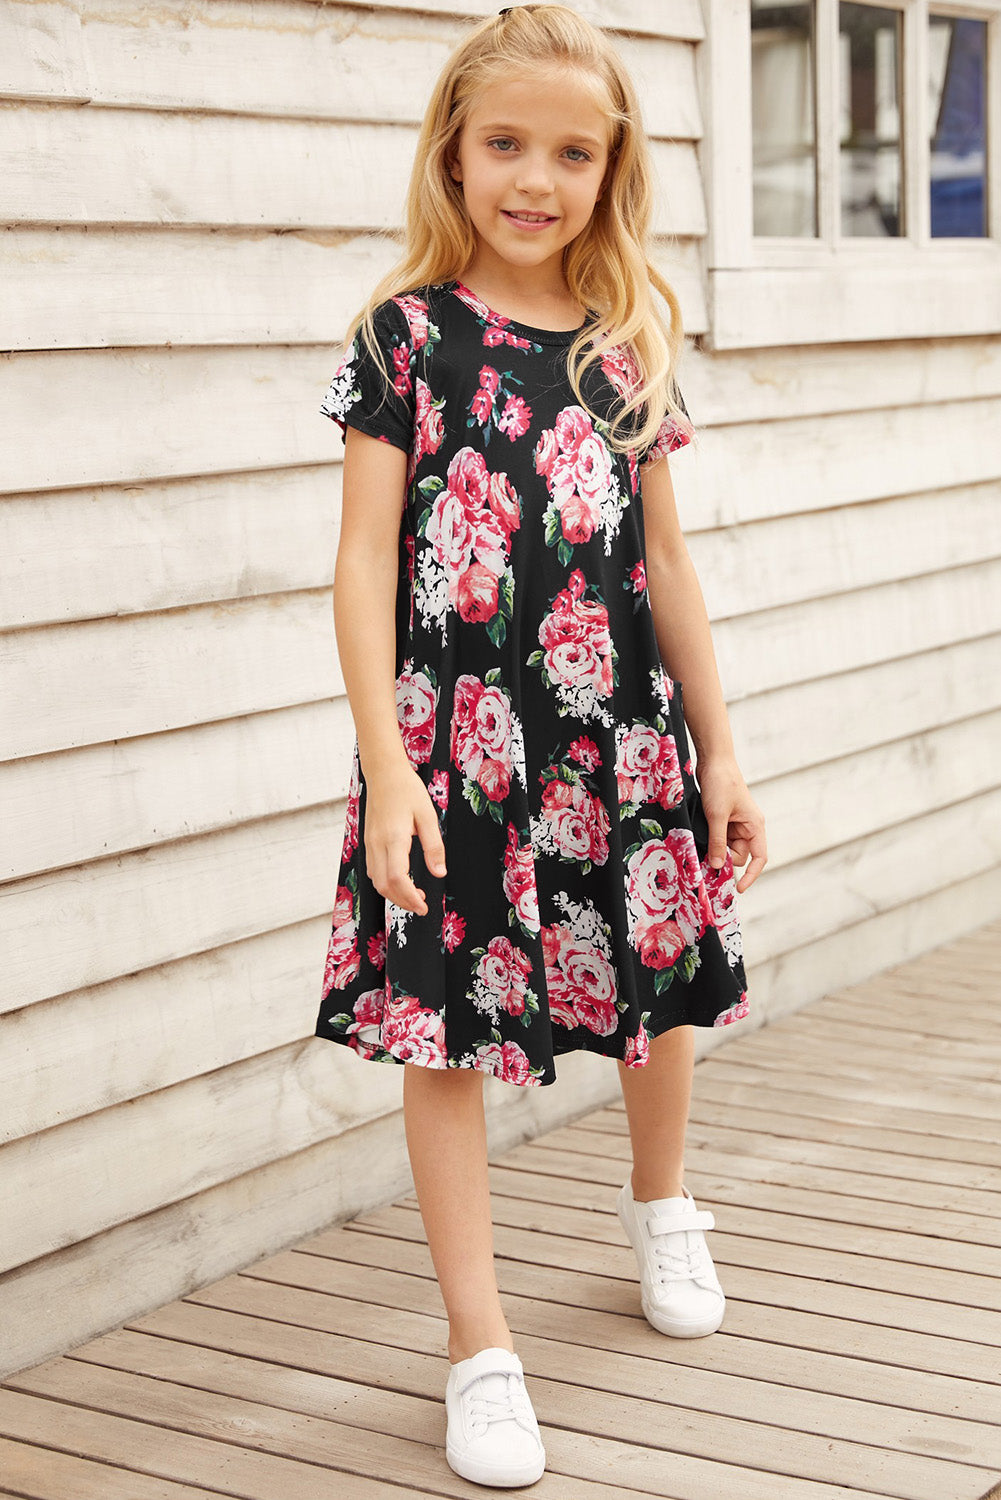 Girls Floral Round Neck Short Sleeve Dress with Pockets, Sizes 4Y - 11Y